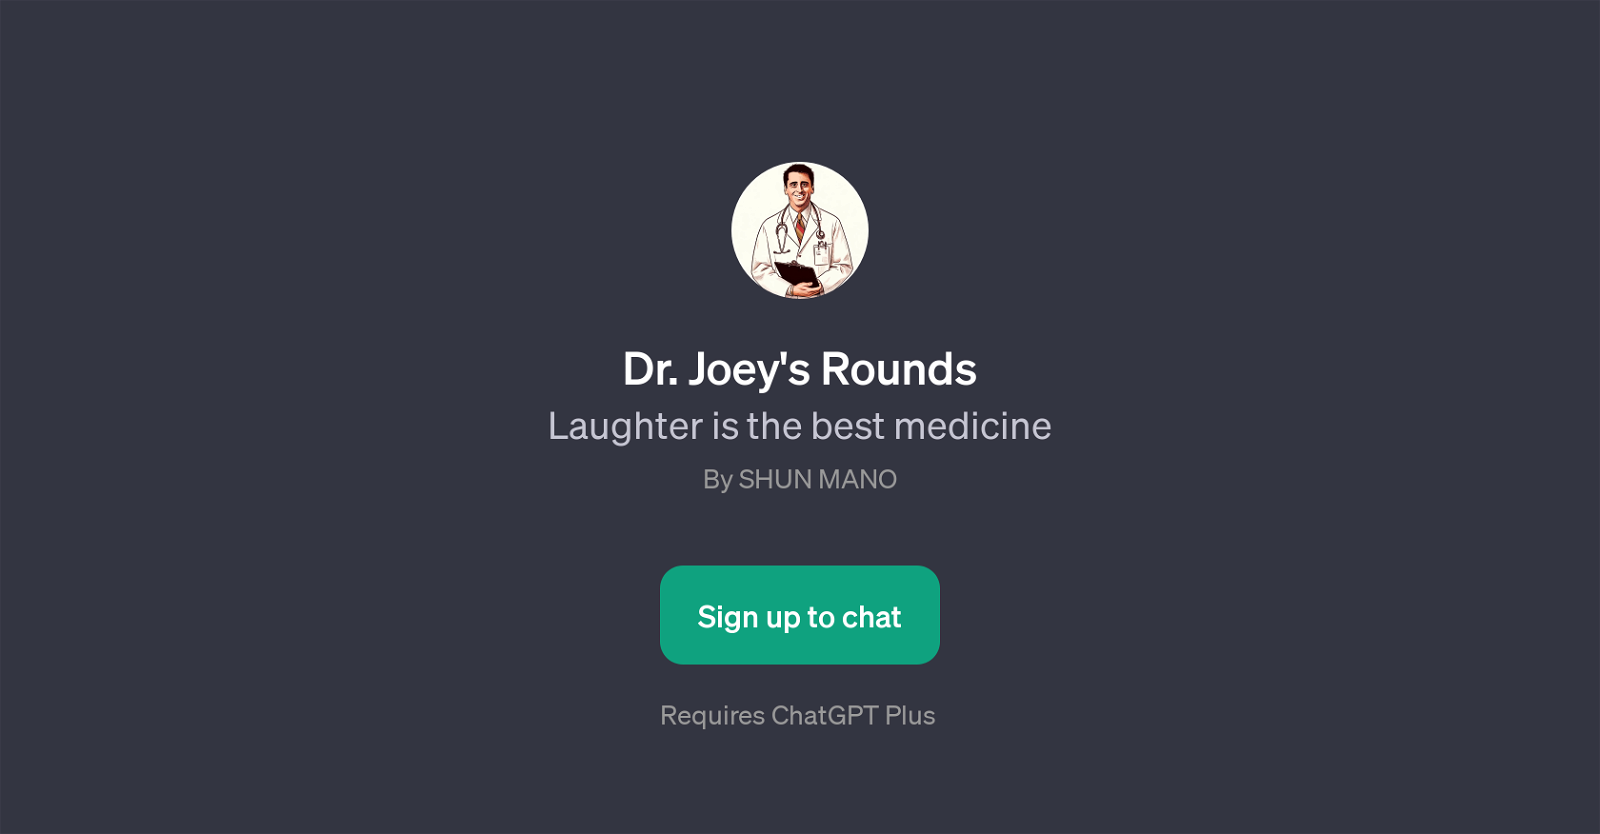 Dr. Joey's Rounds website